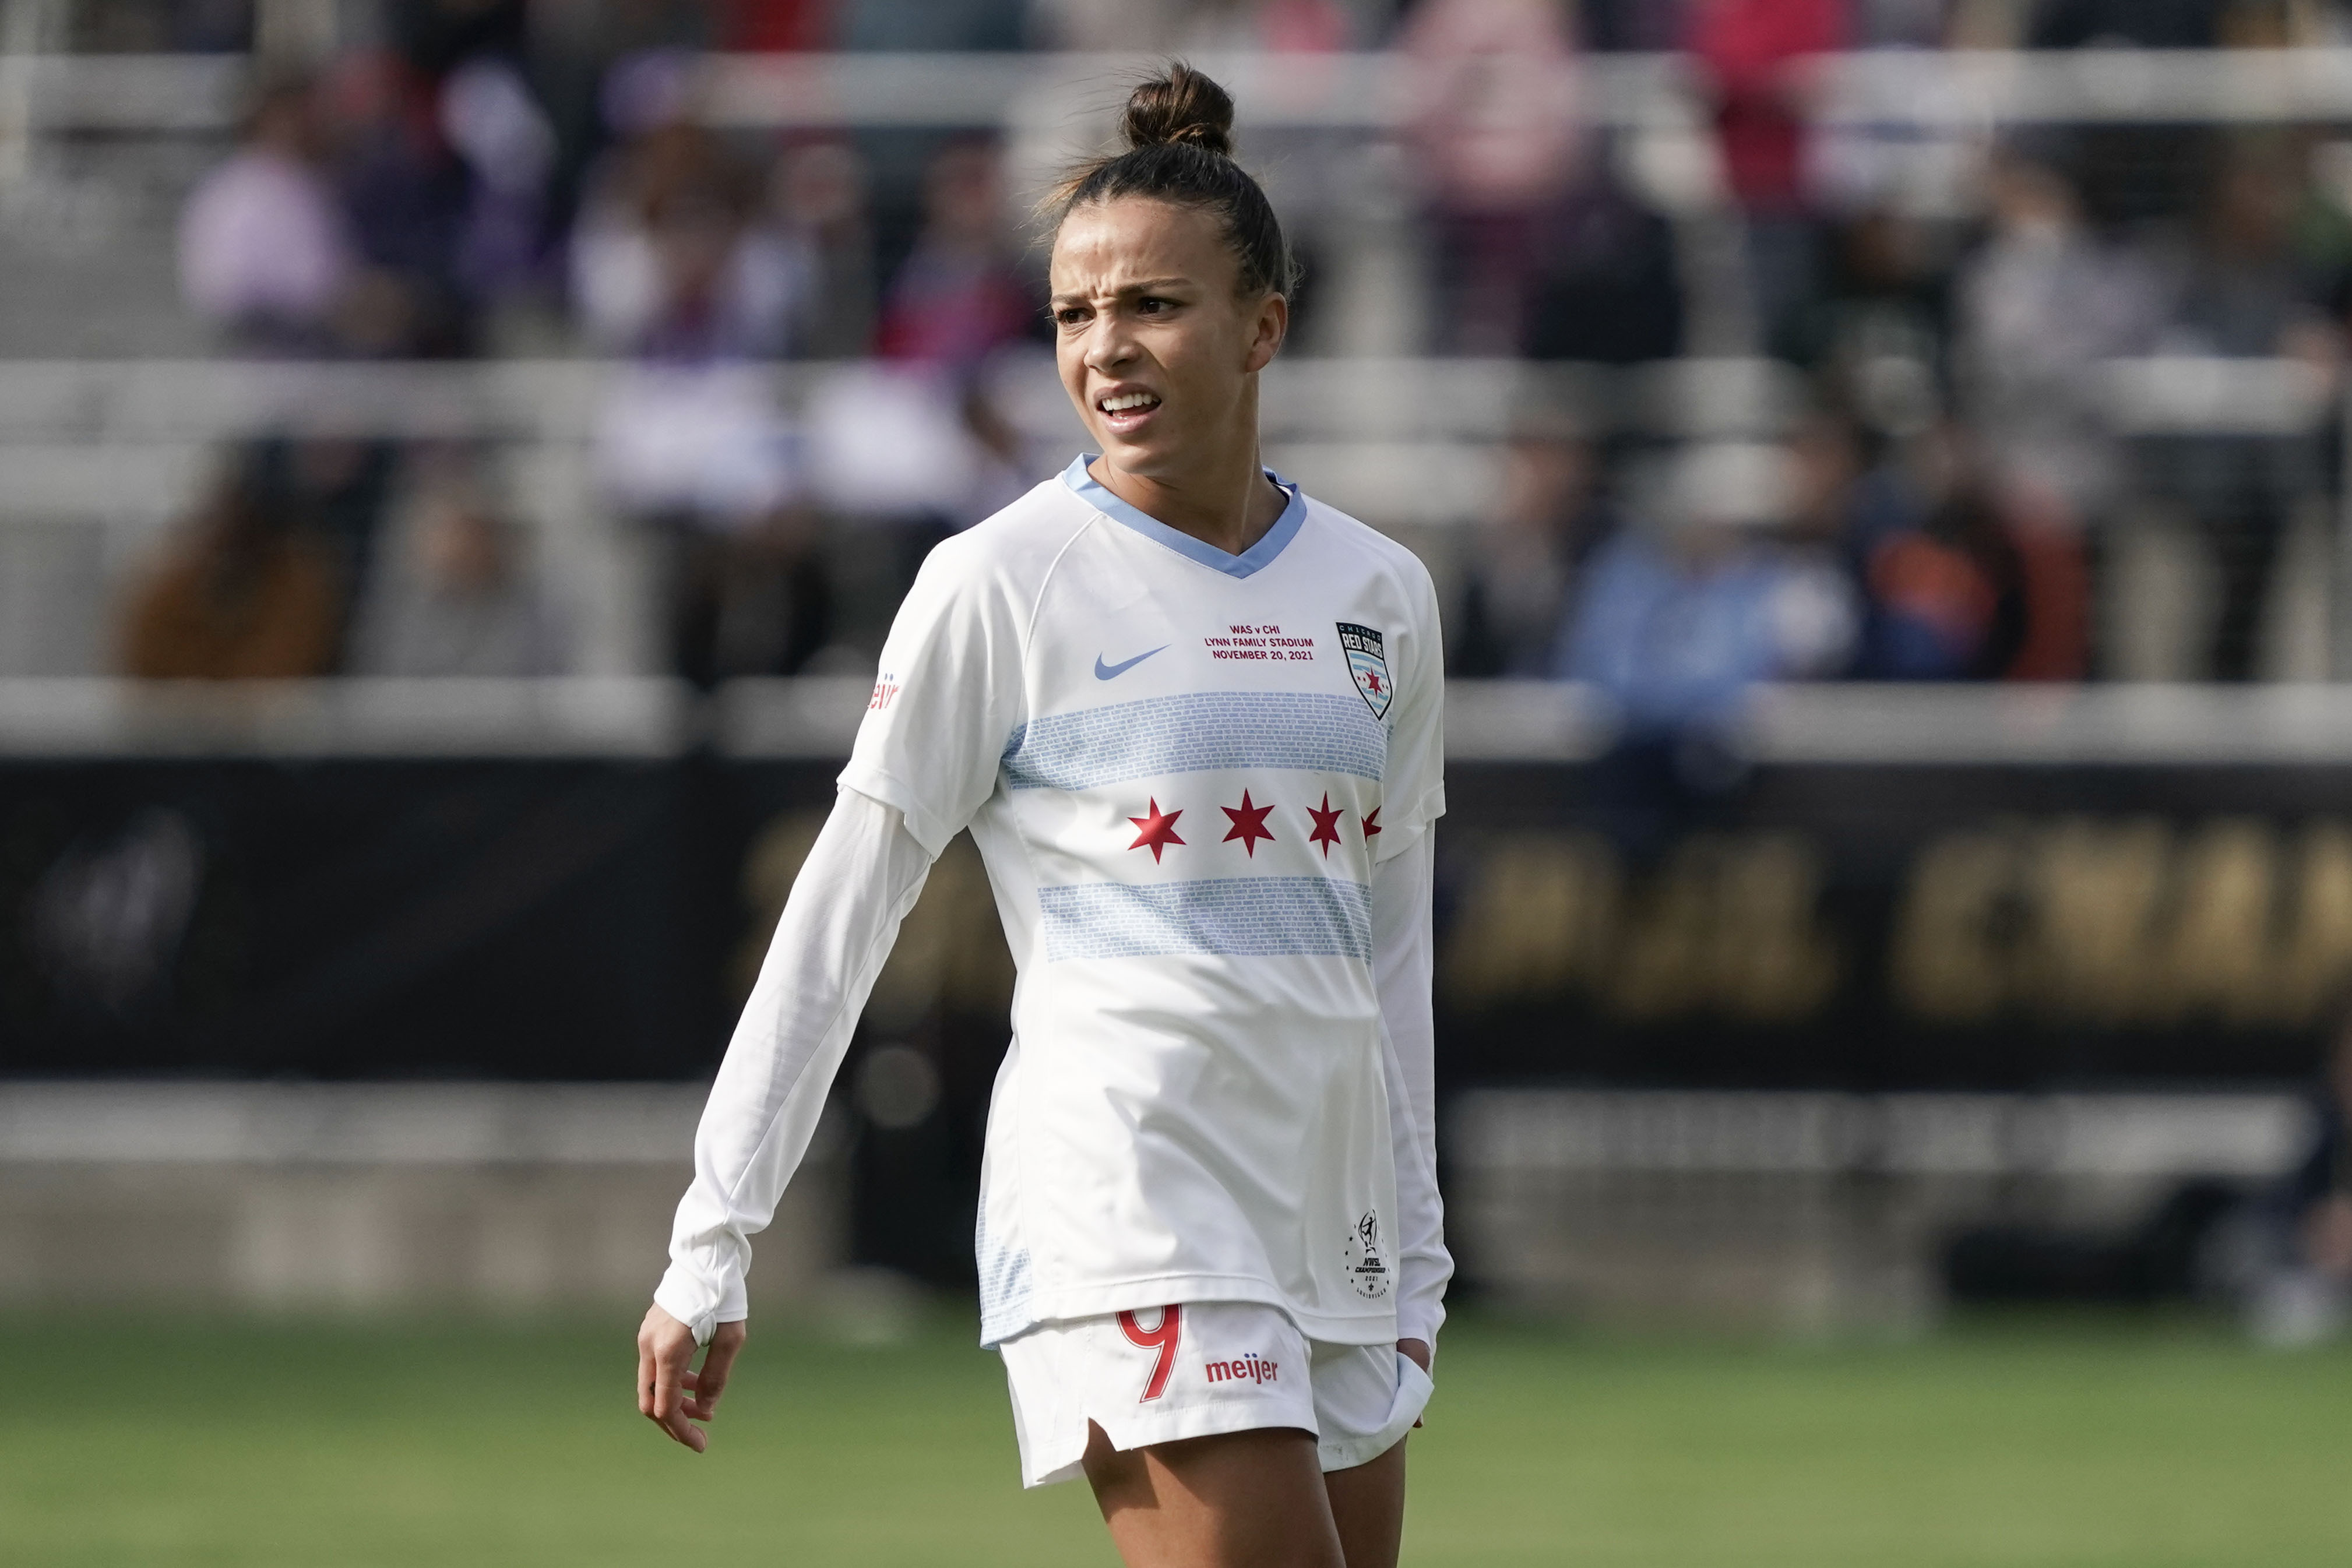 Match Preview: OL Reign vs. Chicago Red Stars